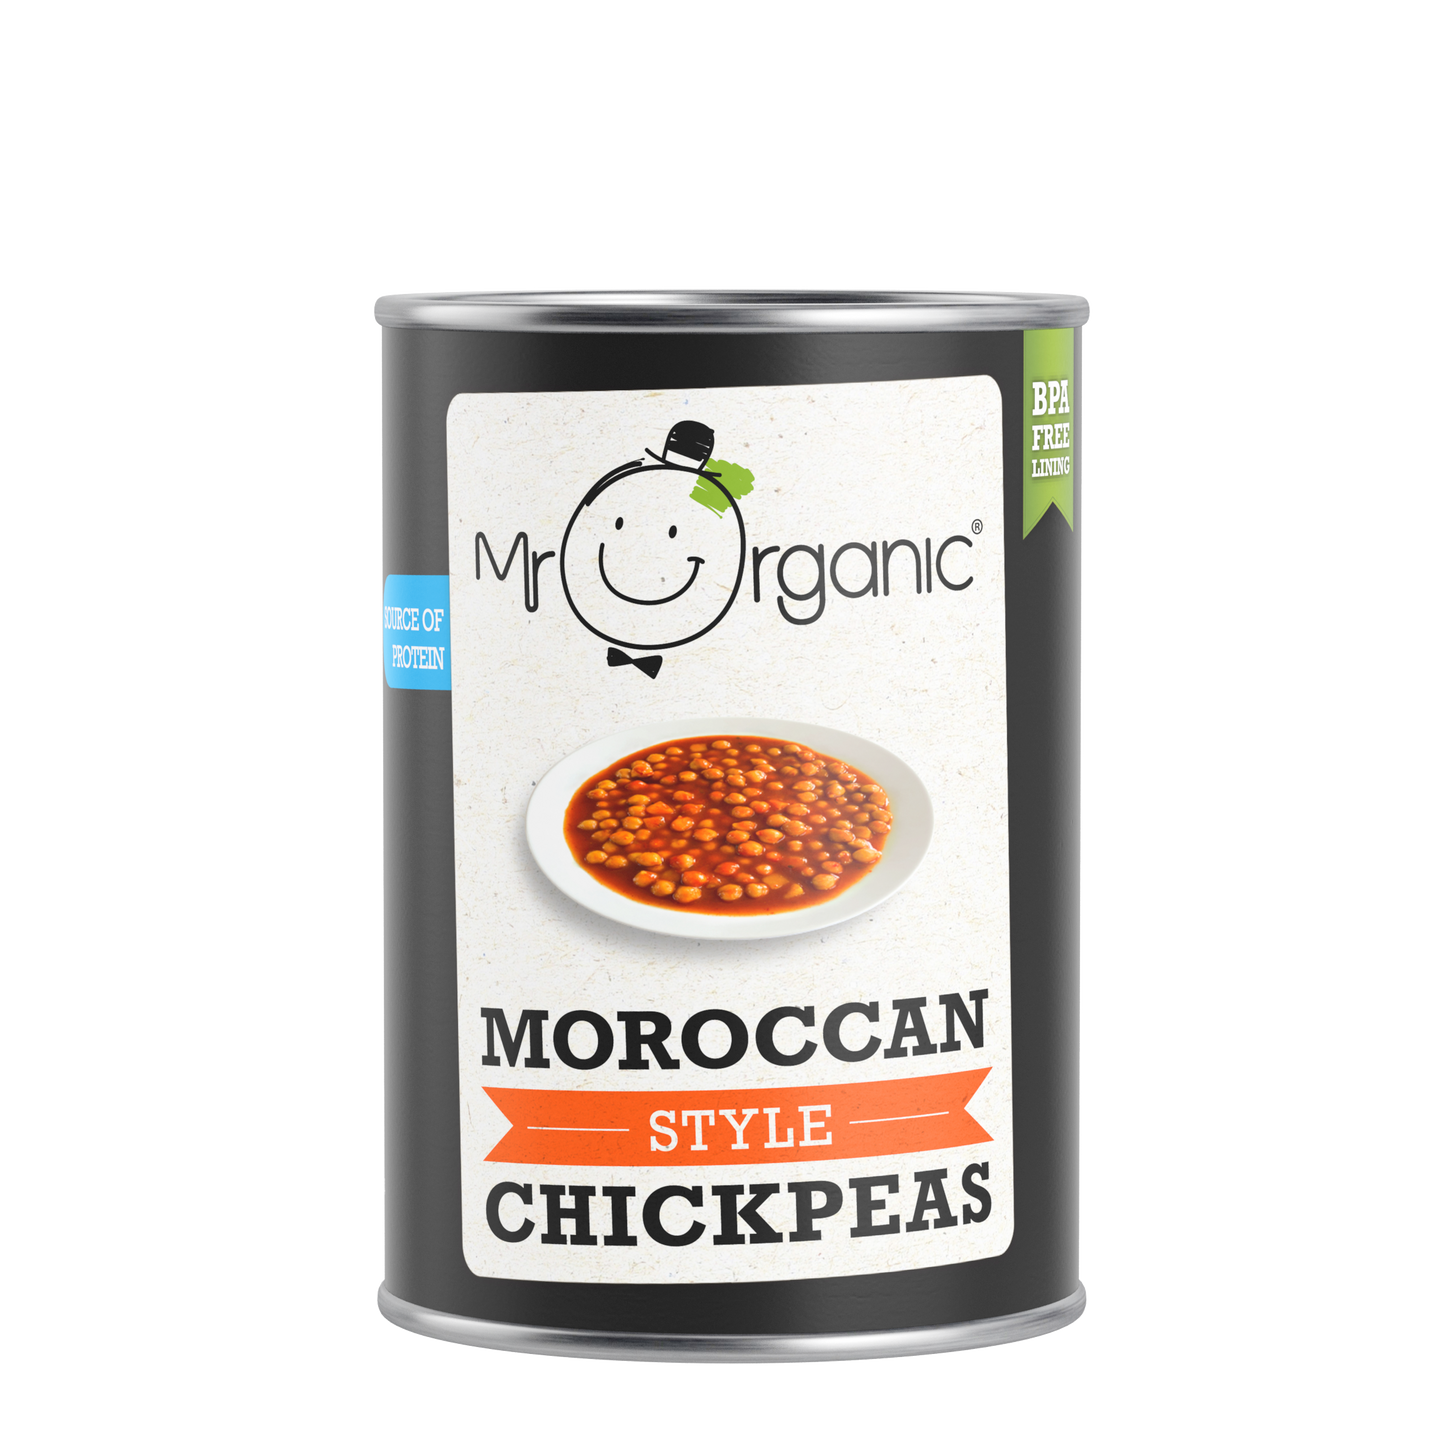 Mr Organic Moroccan Style Chickpeas - Case of 12 X 400g